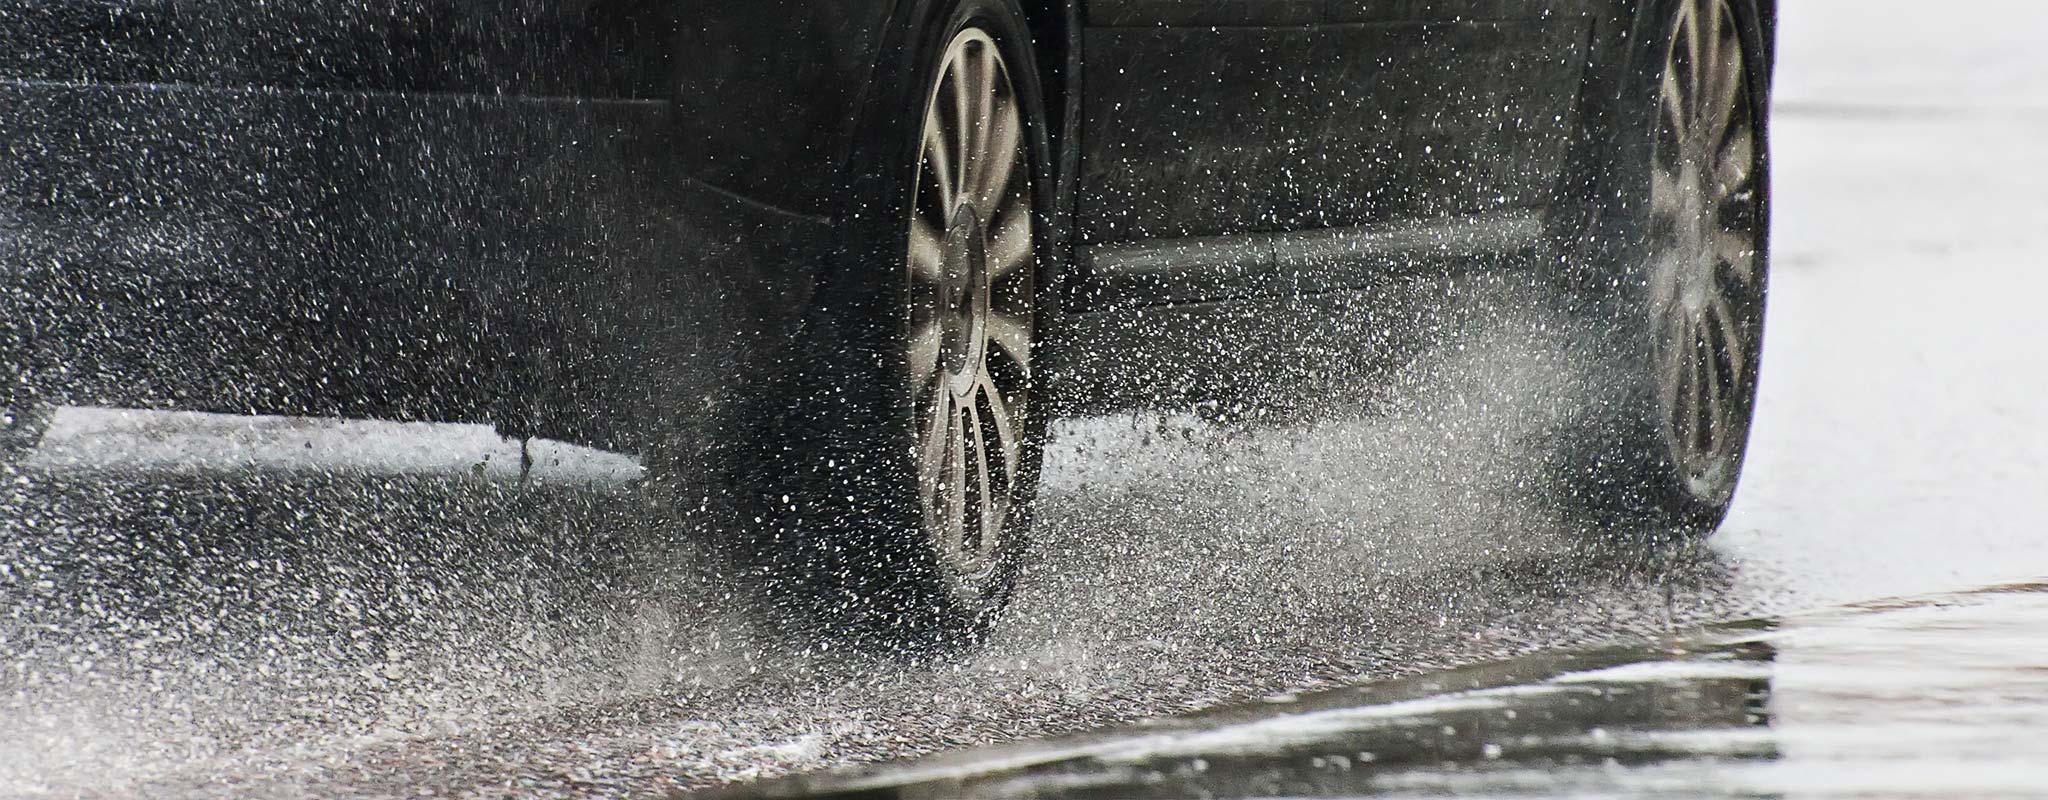 Car driving on wet road.